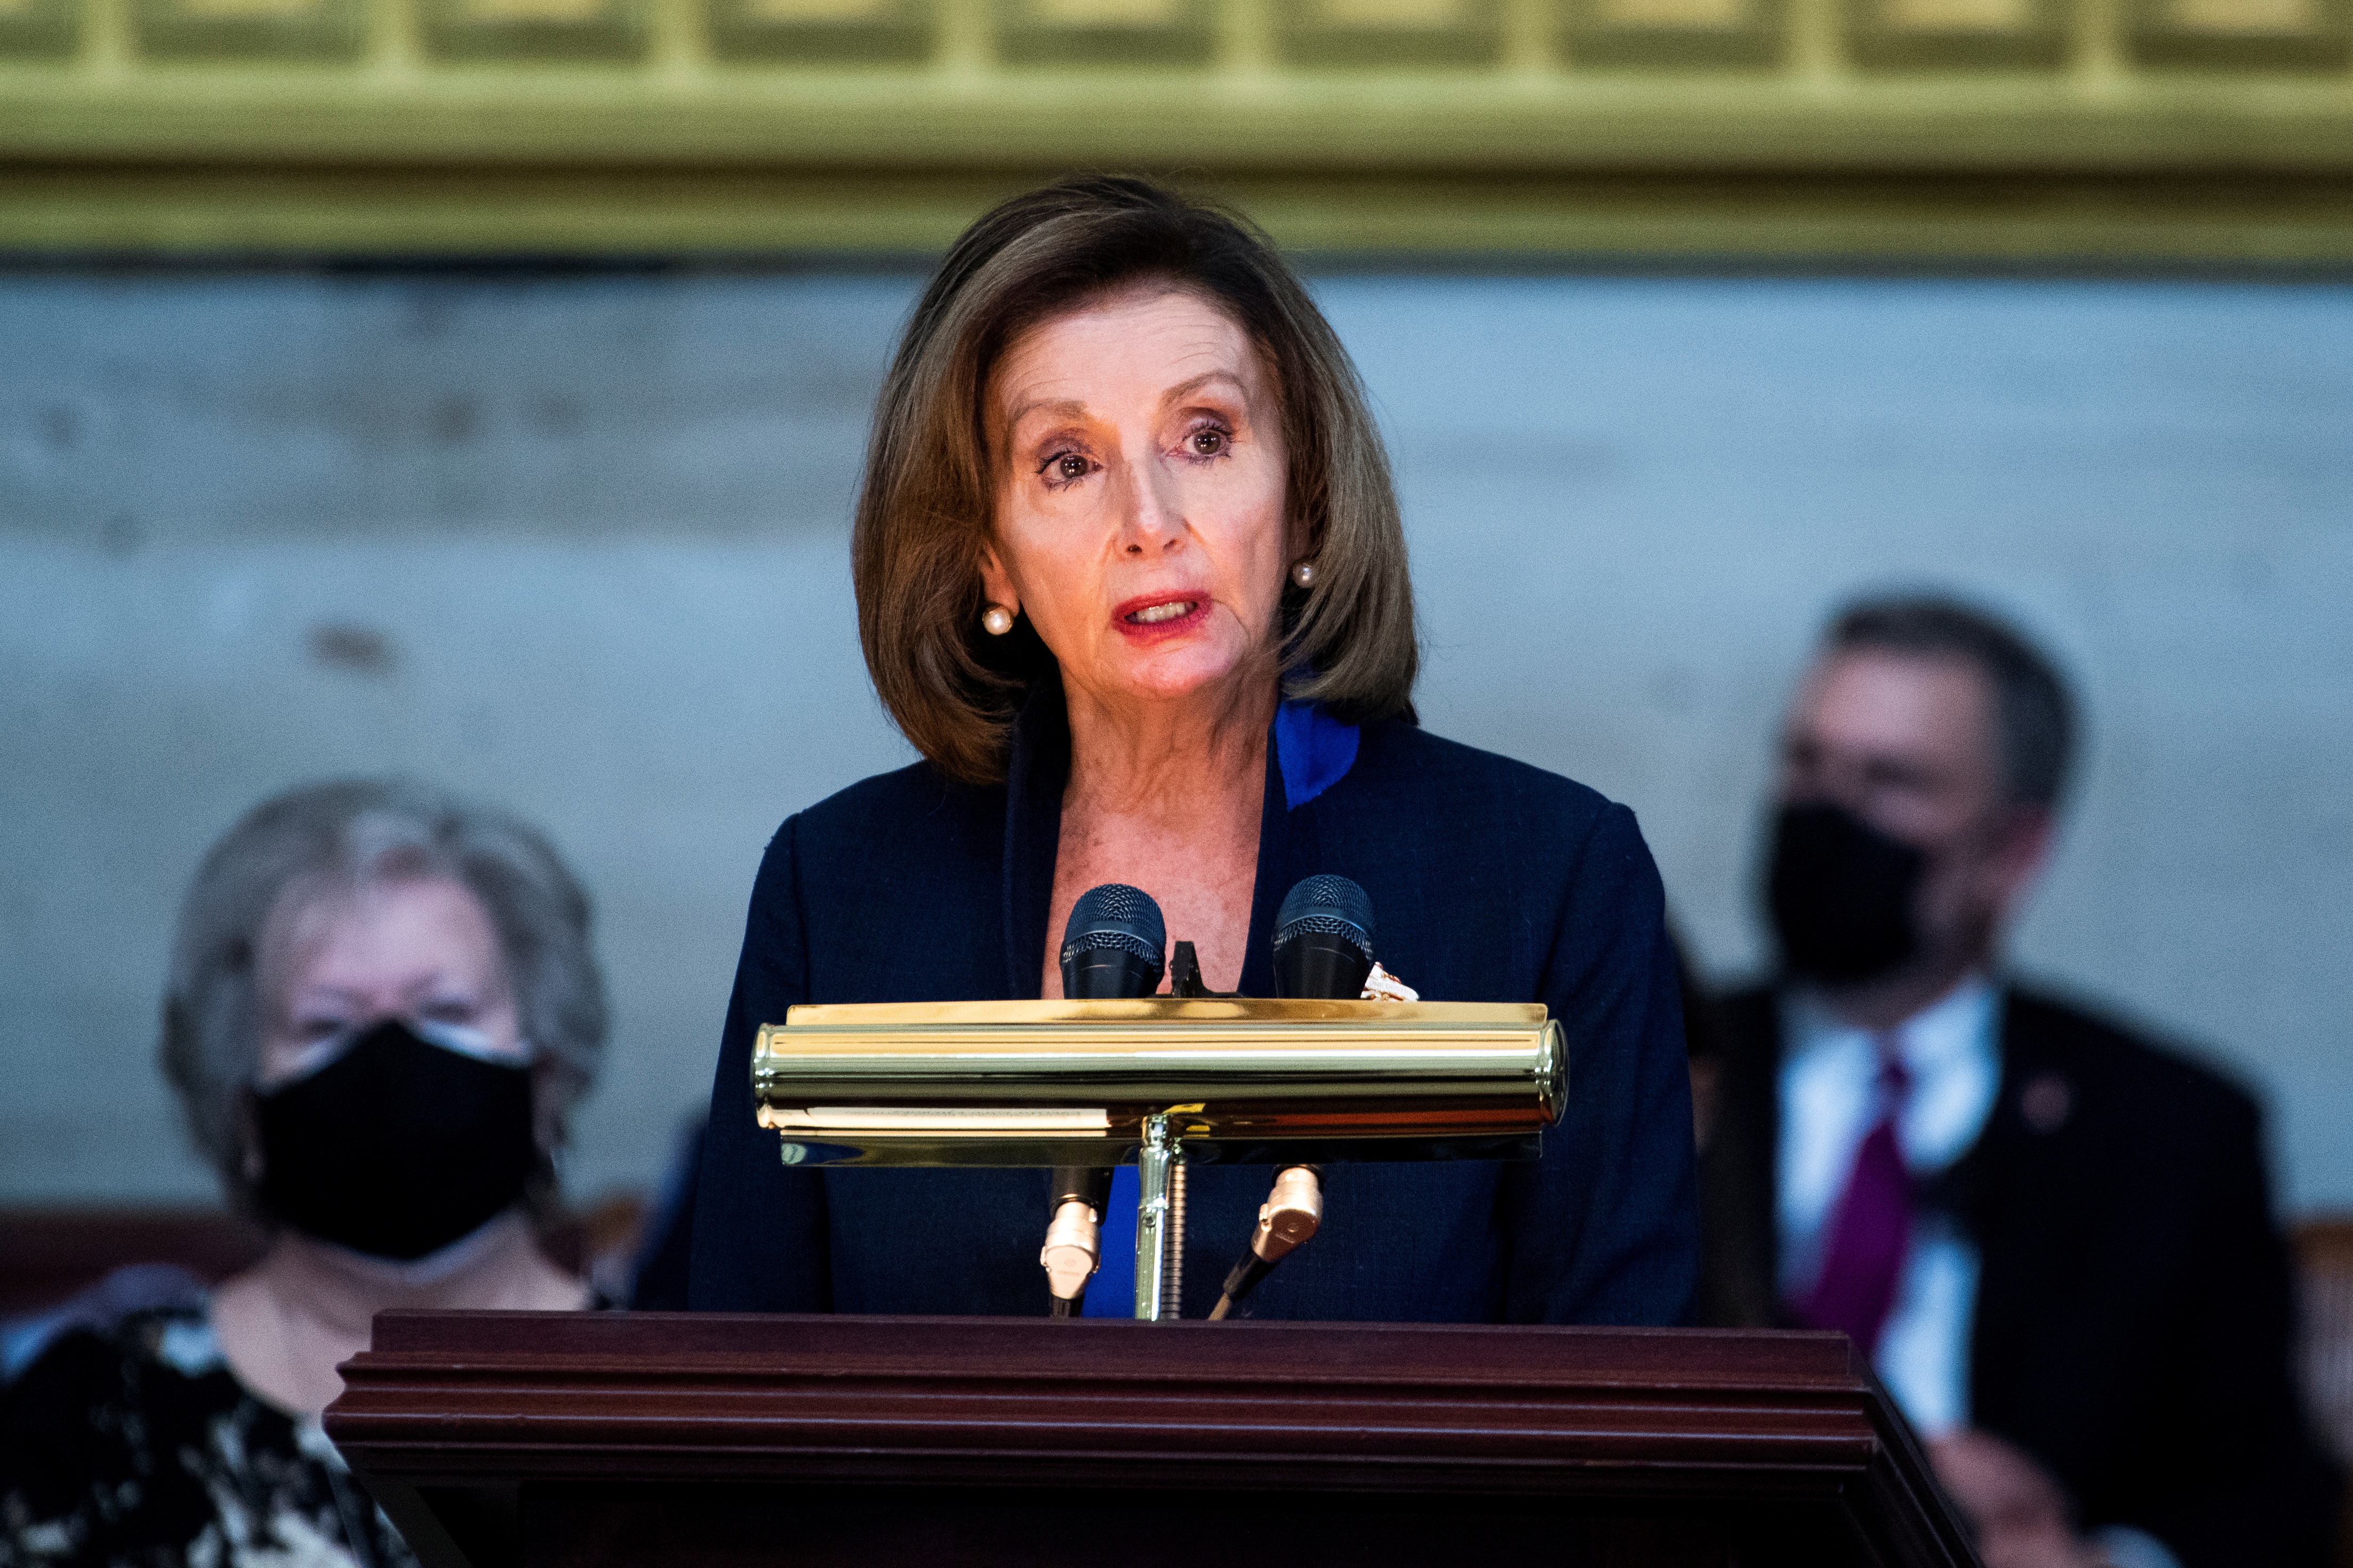 Speaker of the House Nancy Pelosi, D-Calif., speaks during the service for U.S. Capitol Officer William 